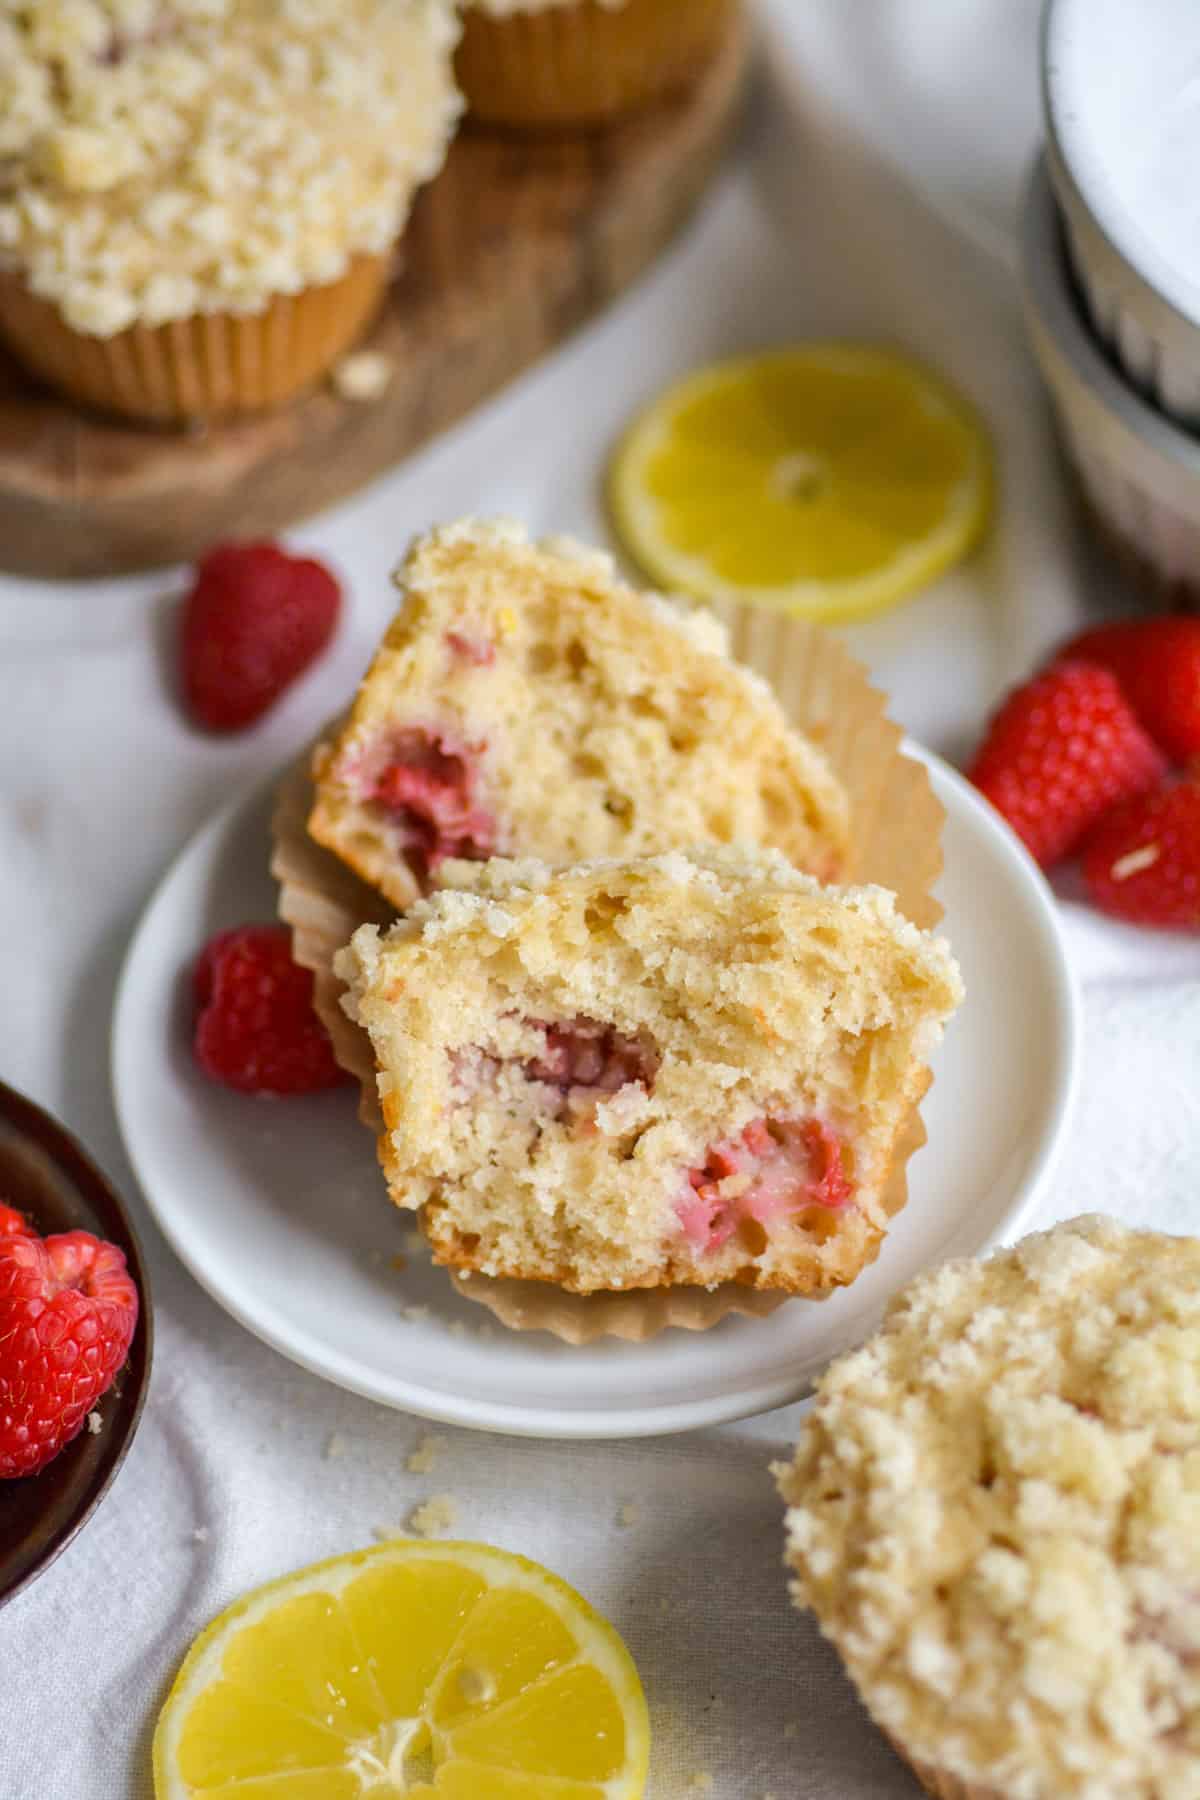 A Vegan Raspberry Lemon Muffin torn in half to show the interior of the muffin on a small plate.